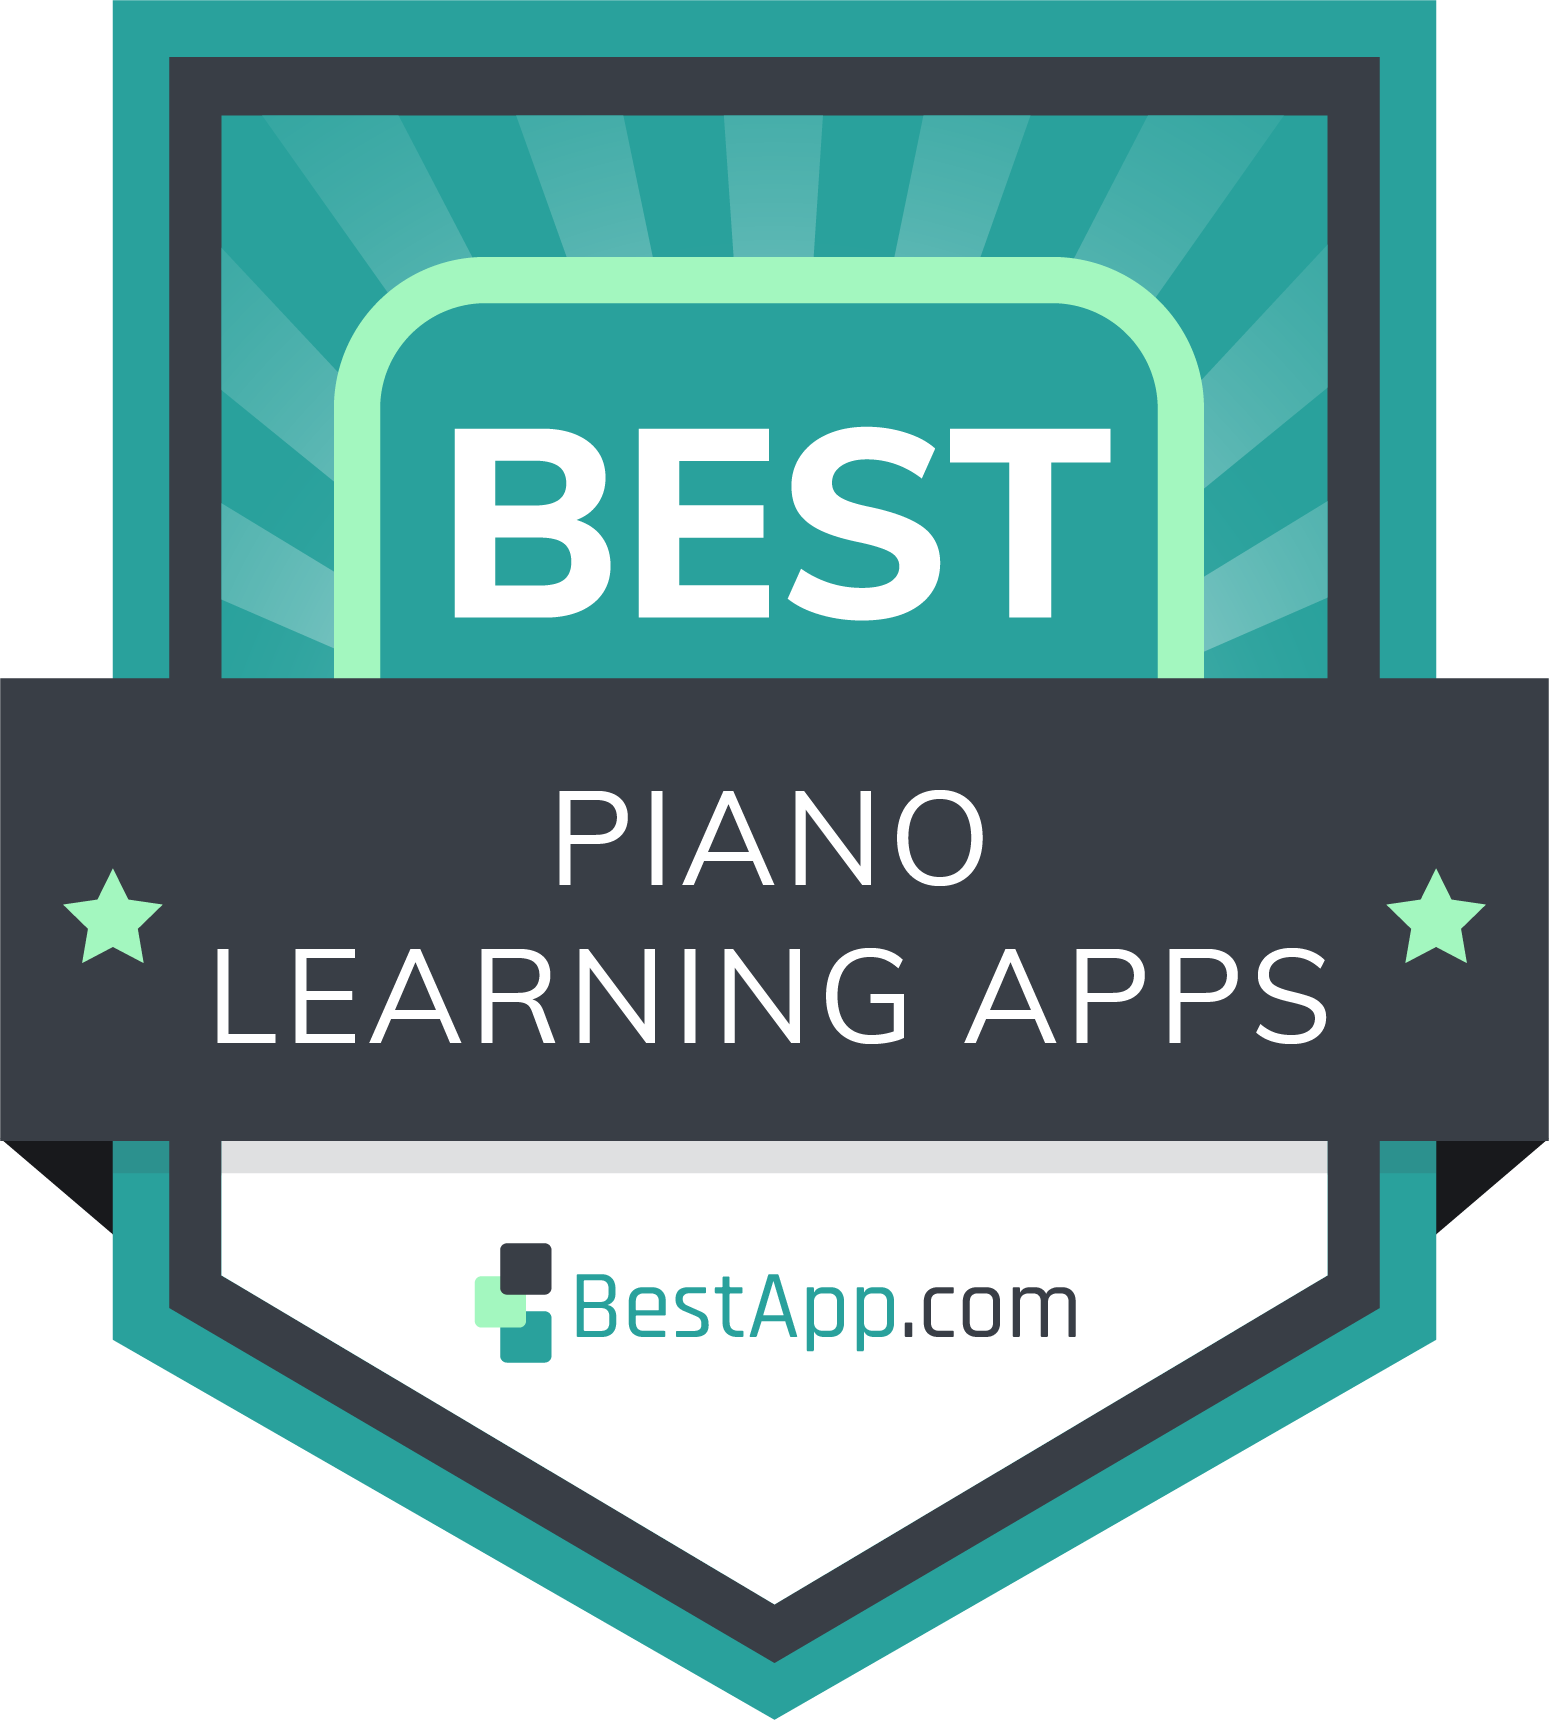 Best Piano Learning Apps Badge